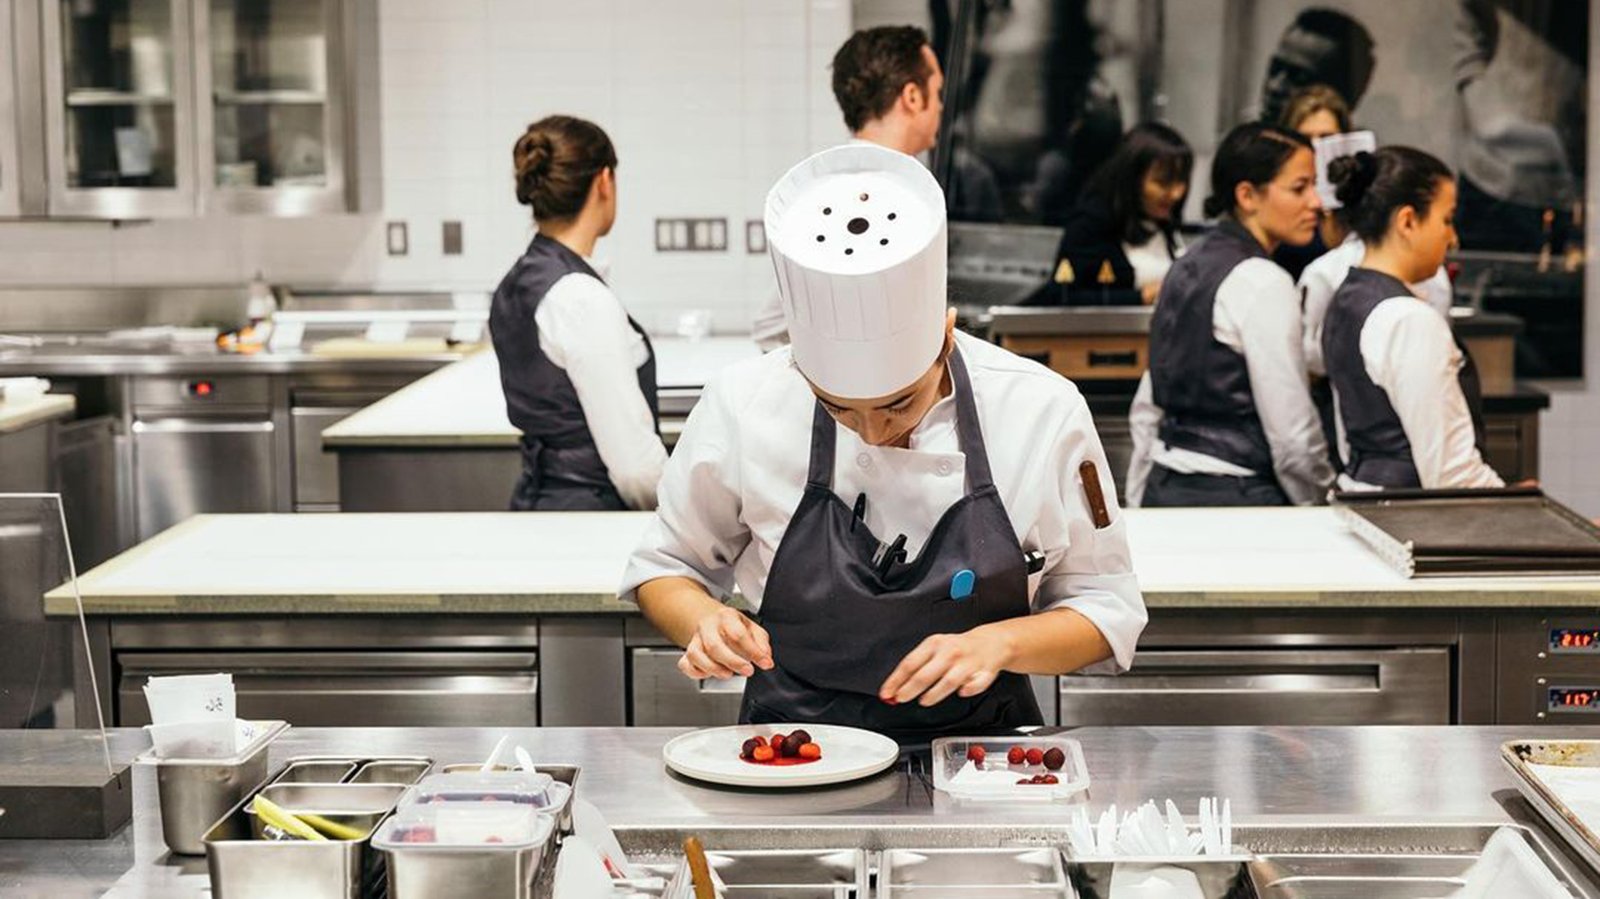 Iconic Michelin Star Restaurant Eleven Madison Park Ditches Meat - Launches Fully Plant-Based Food Menu